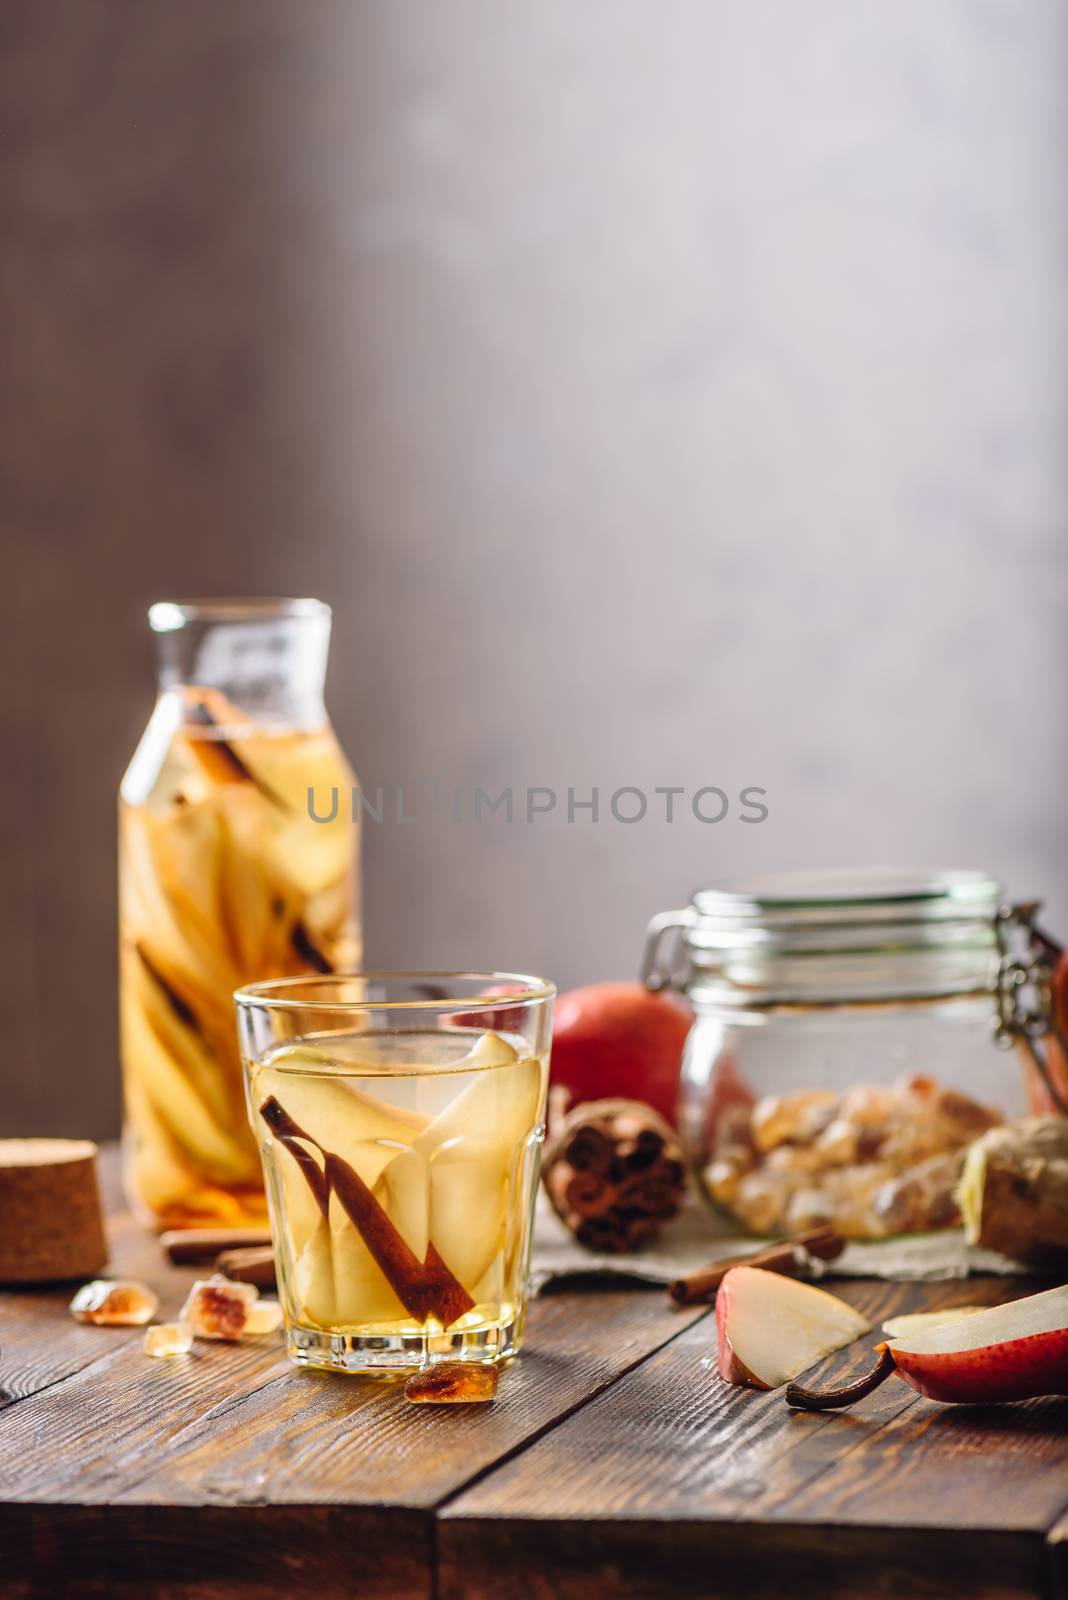 Water with Pear, Ginger and Cinnamon. by Seva_blsv